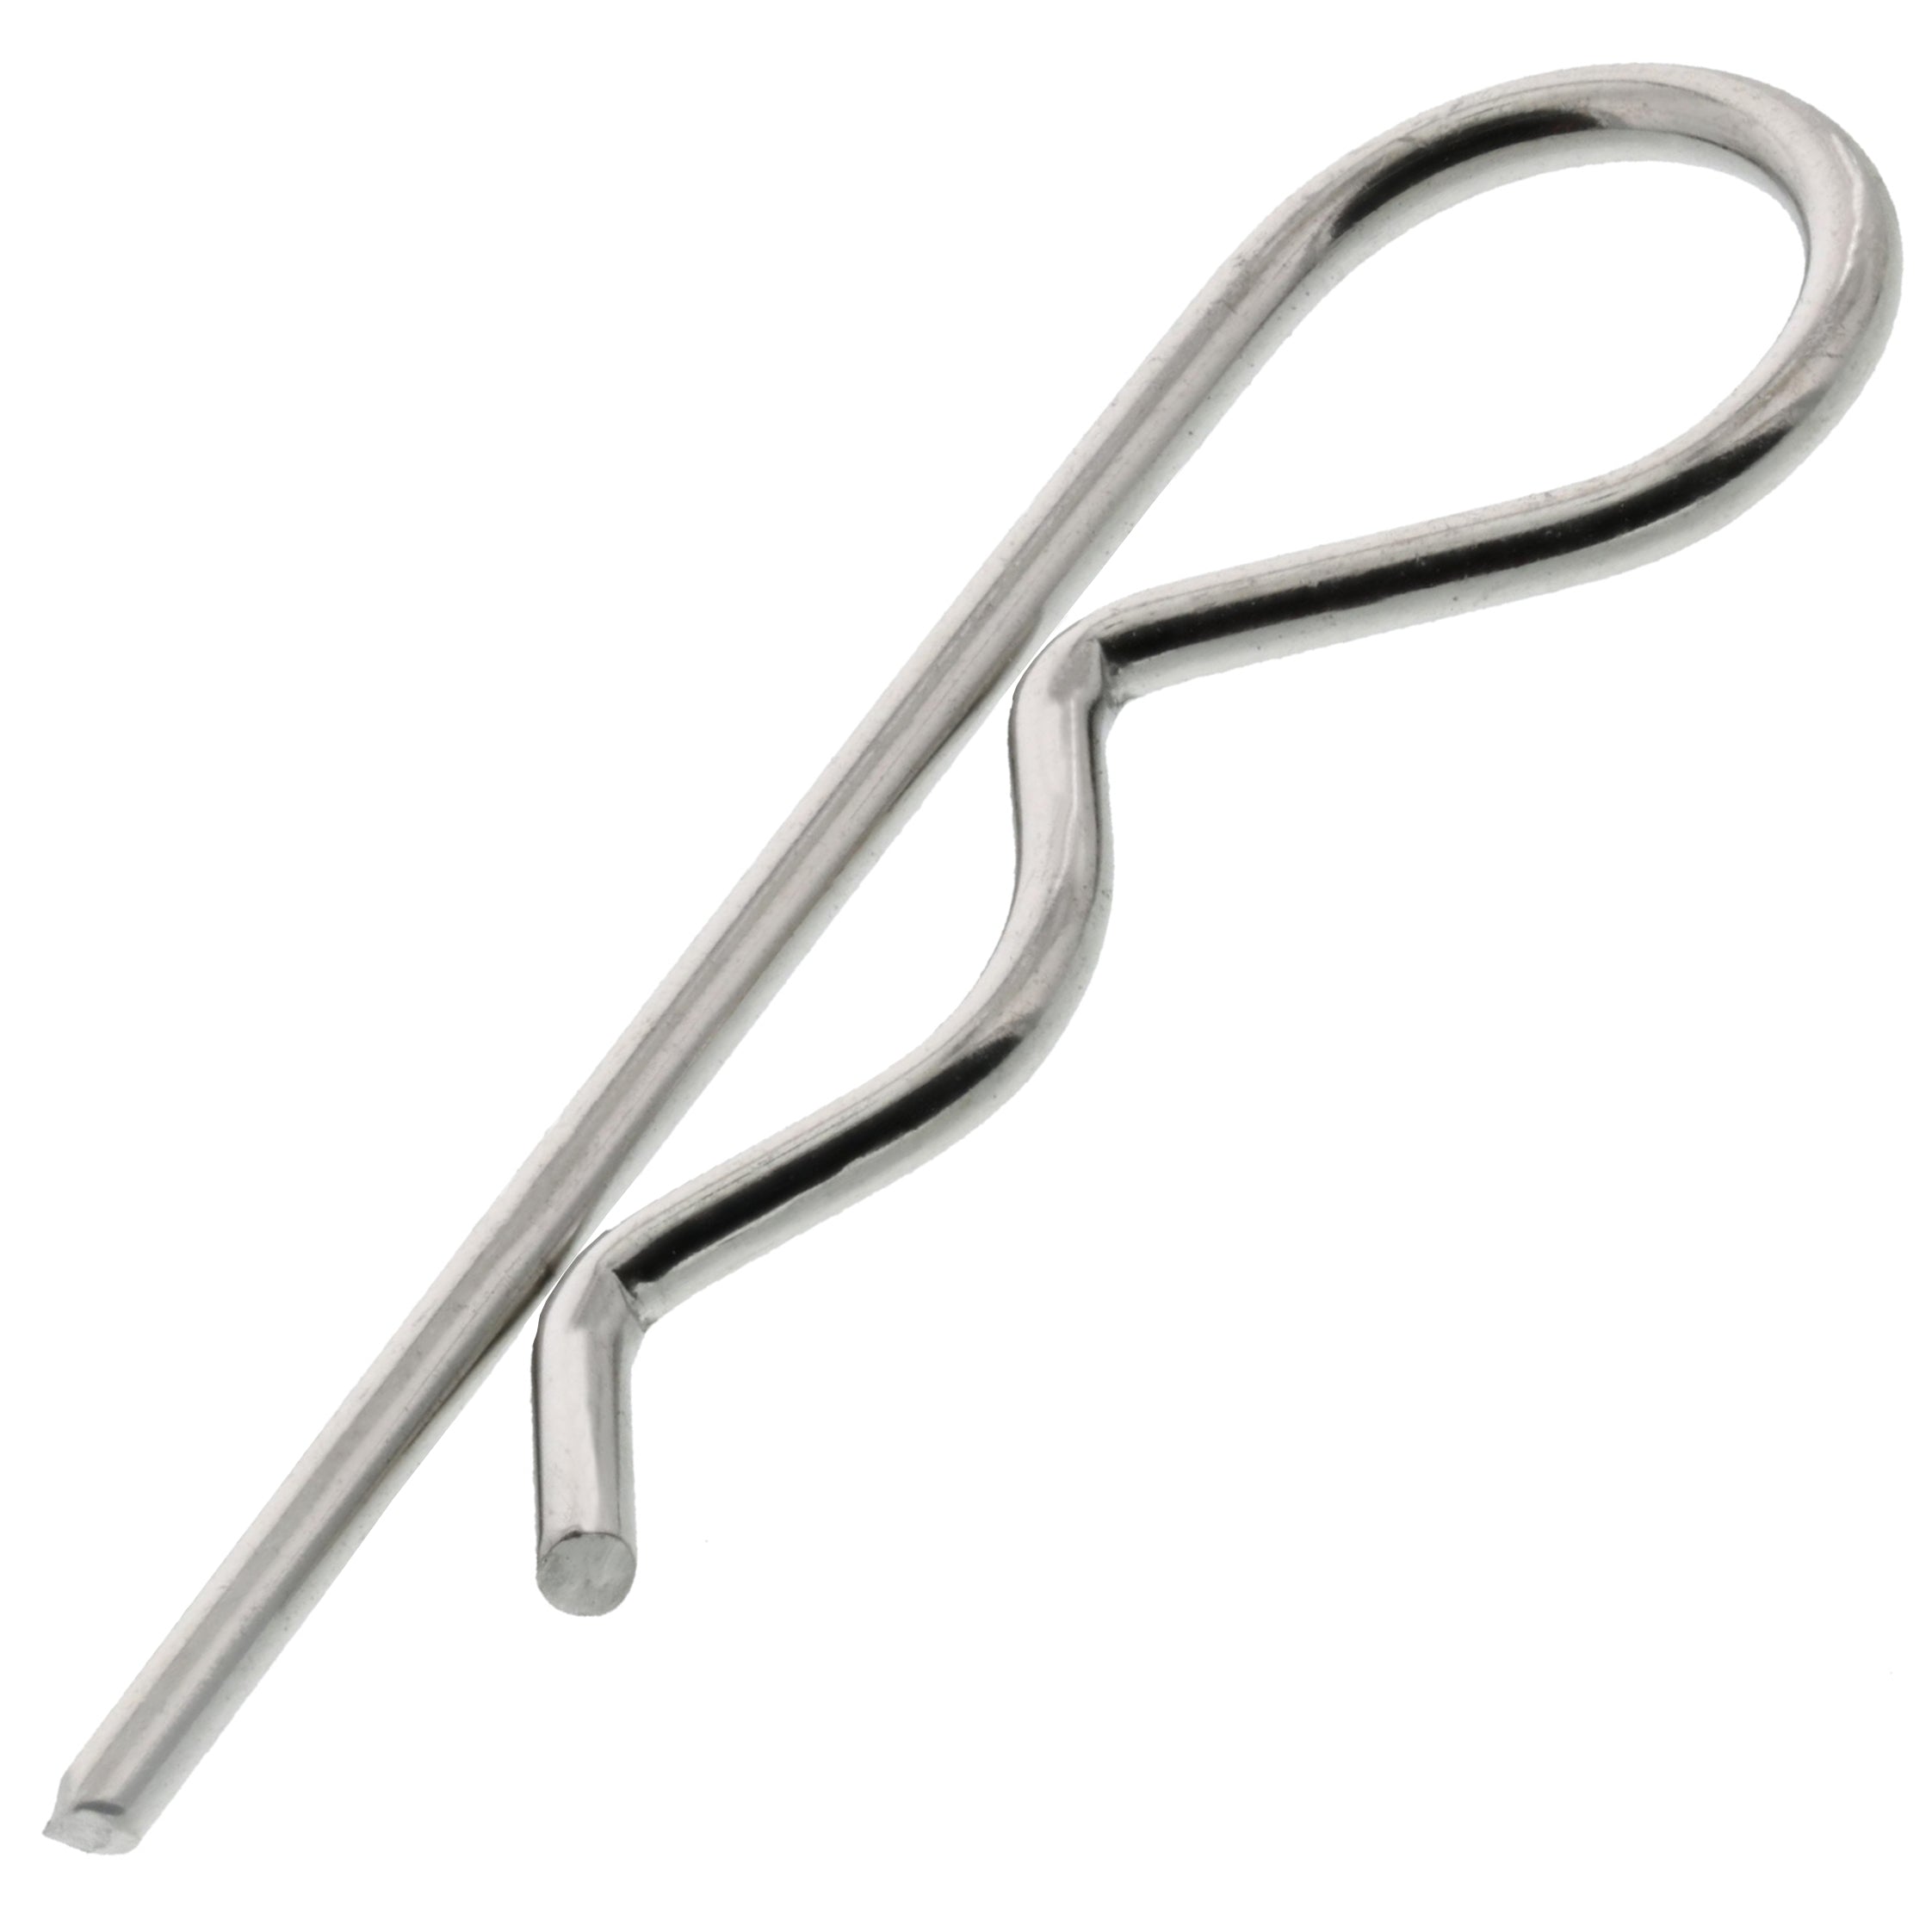 2mm Stainless Steel Hairpin Cotter